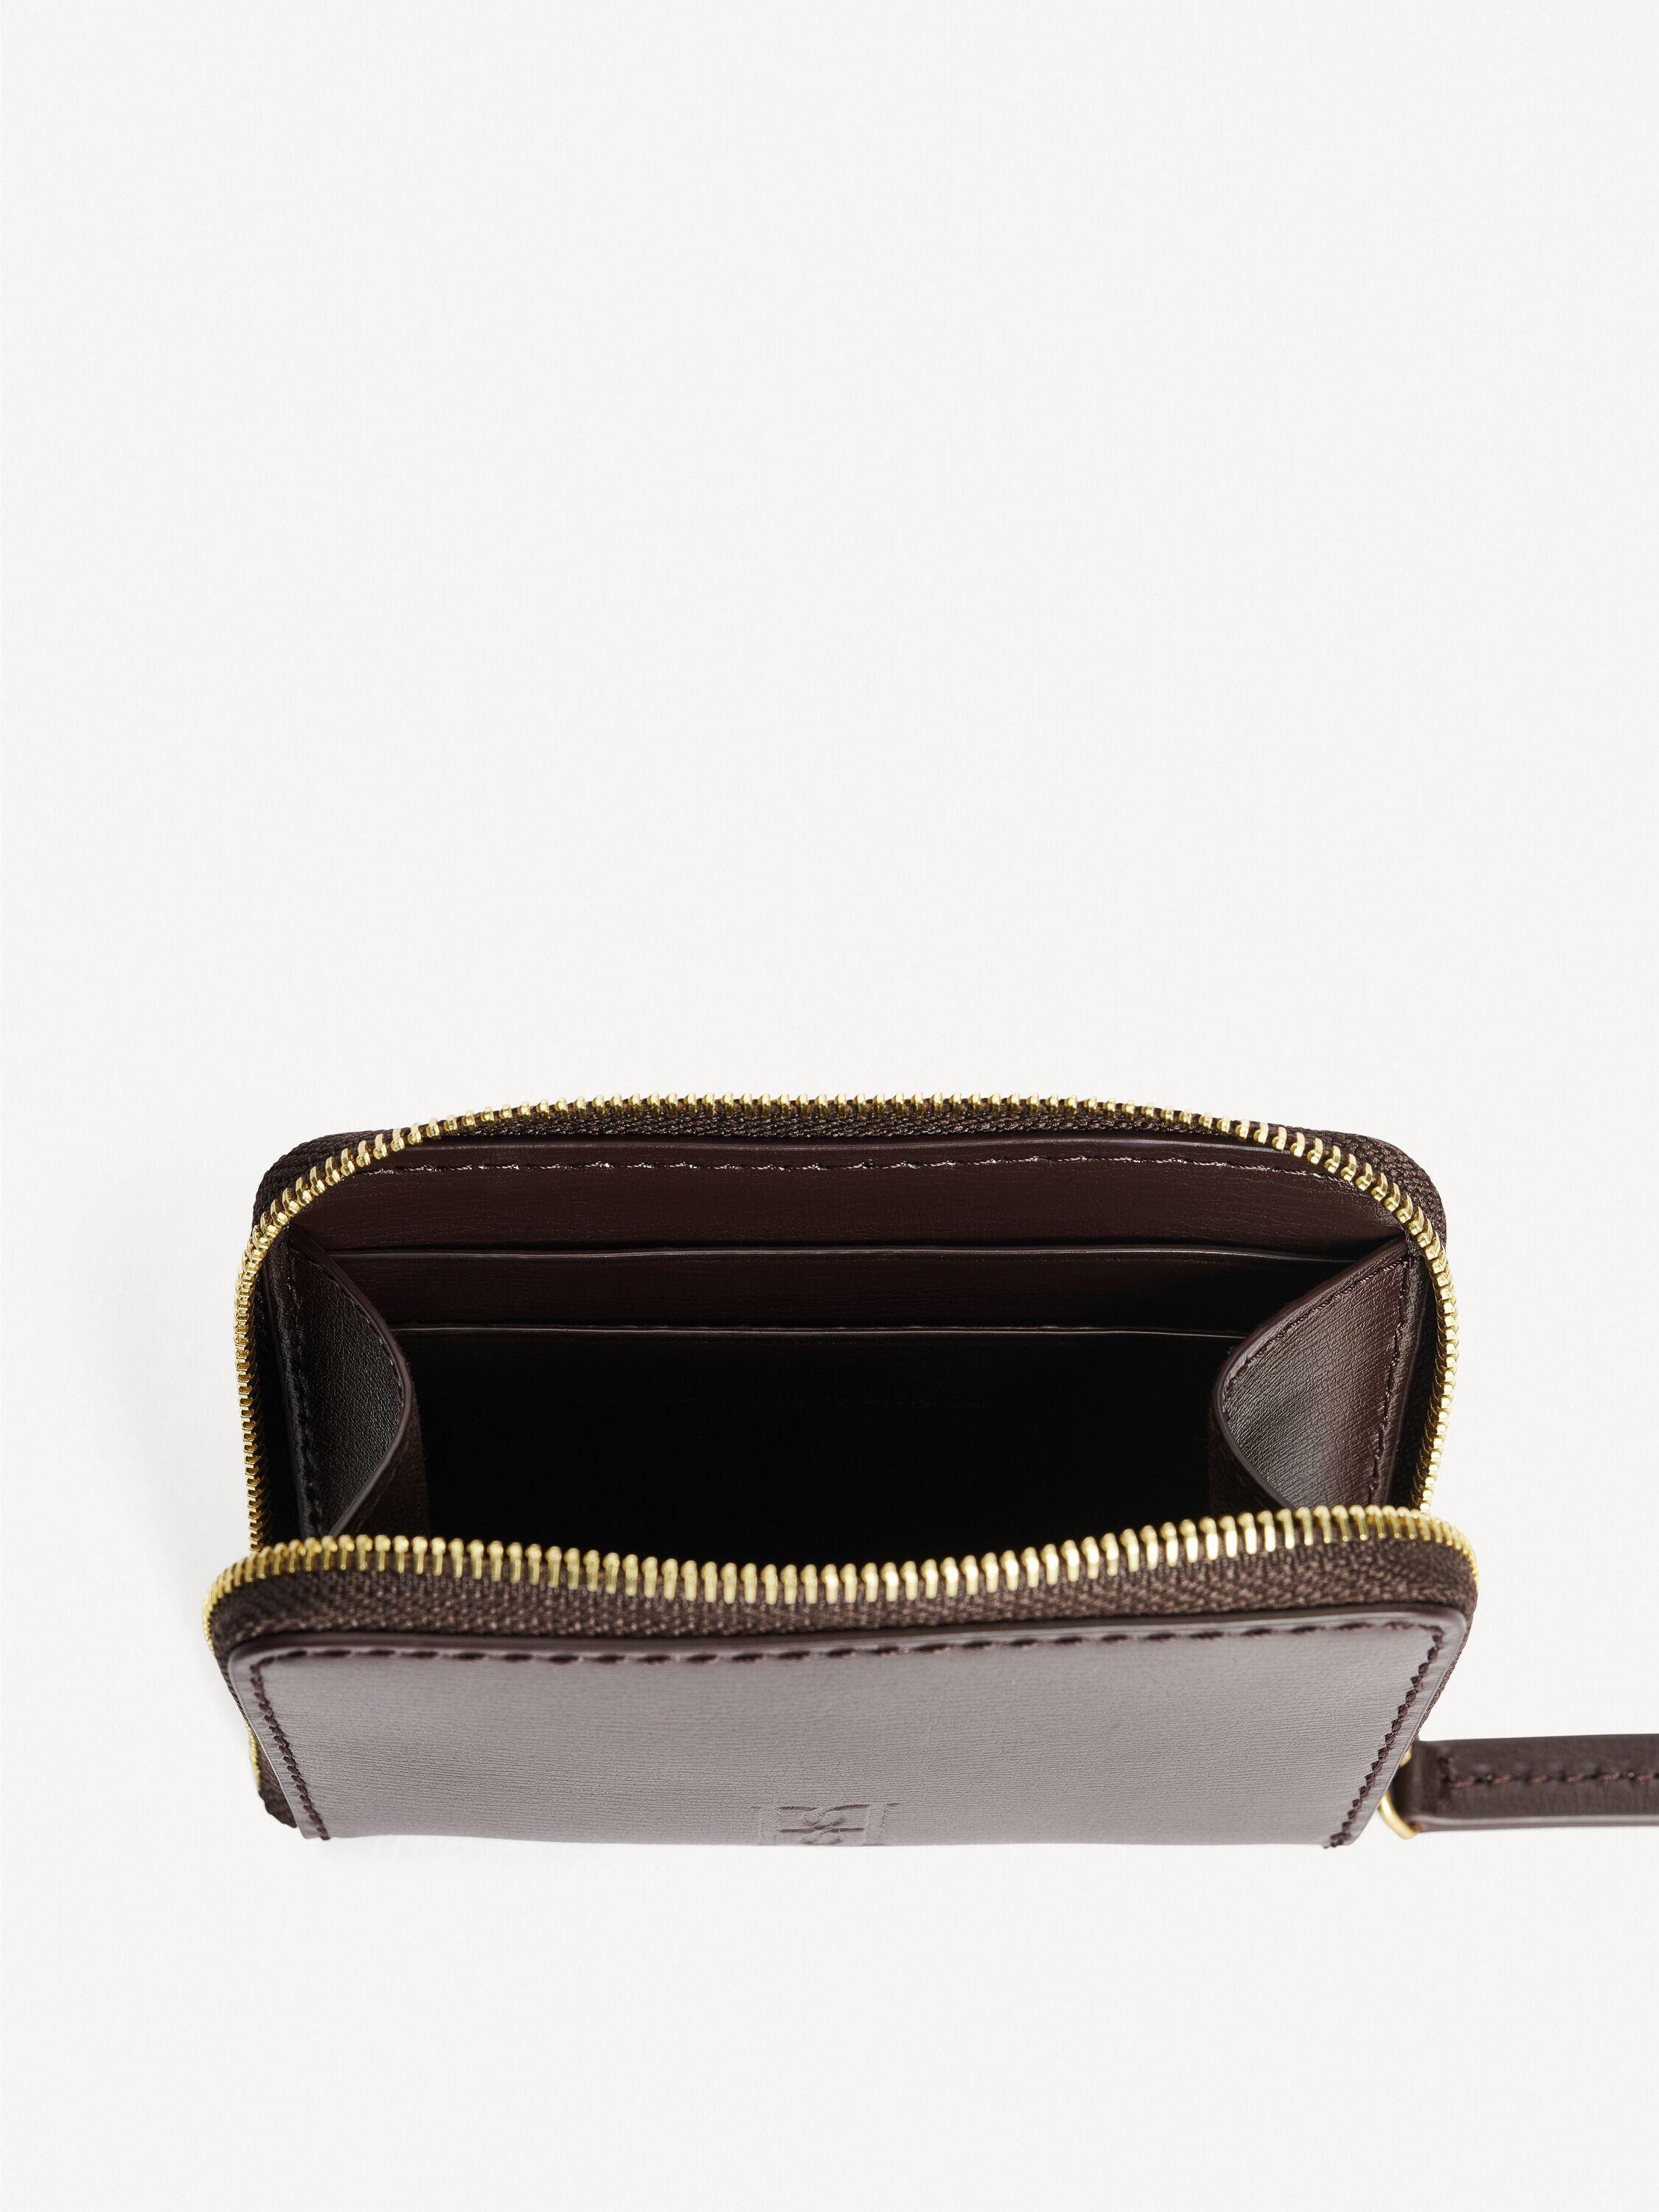 Wallets & cardholders | Explore all styles here | By Malene Birger